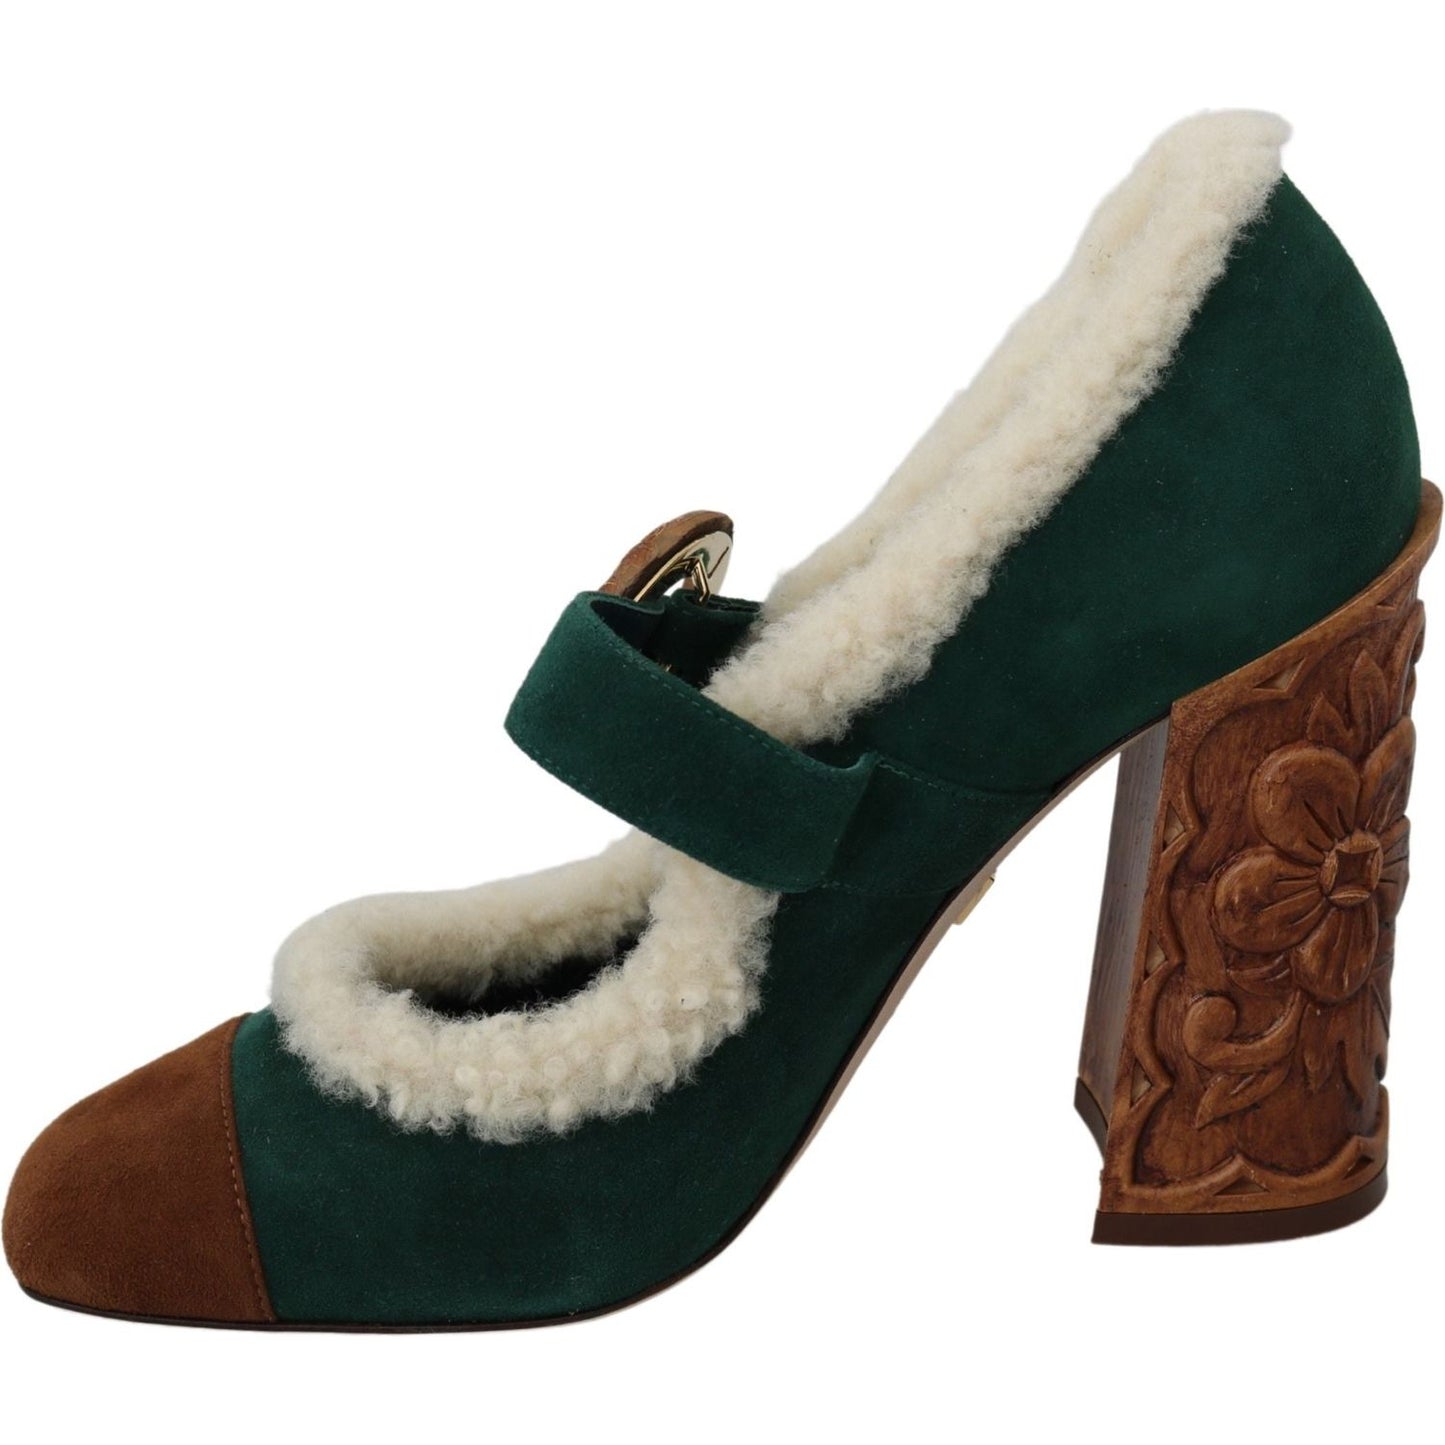 Dolce & Gabbana Chic Green Suede Mary Janes with Shearling Trim green-suede-fur-shearling-mary-jane-shoes IMG_0160-ba9e32d4-63d.jpg